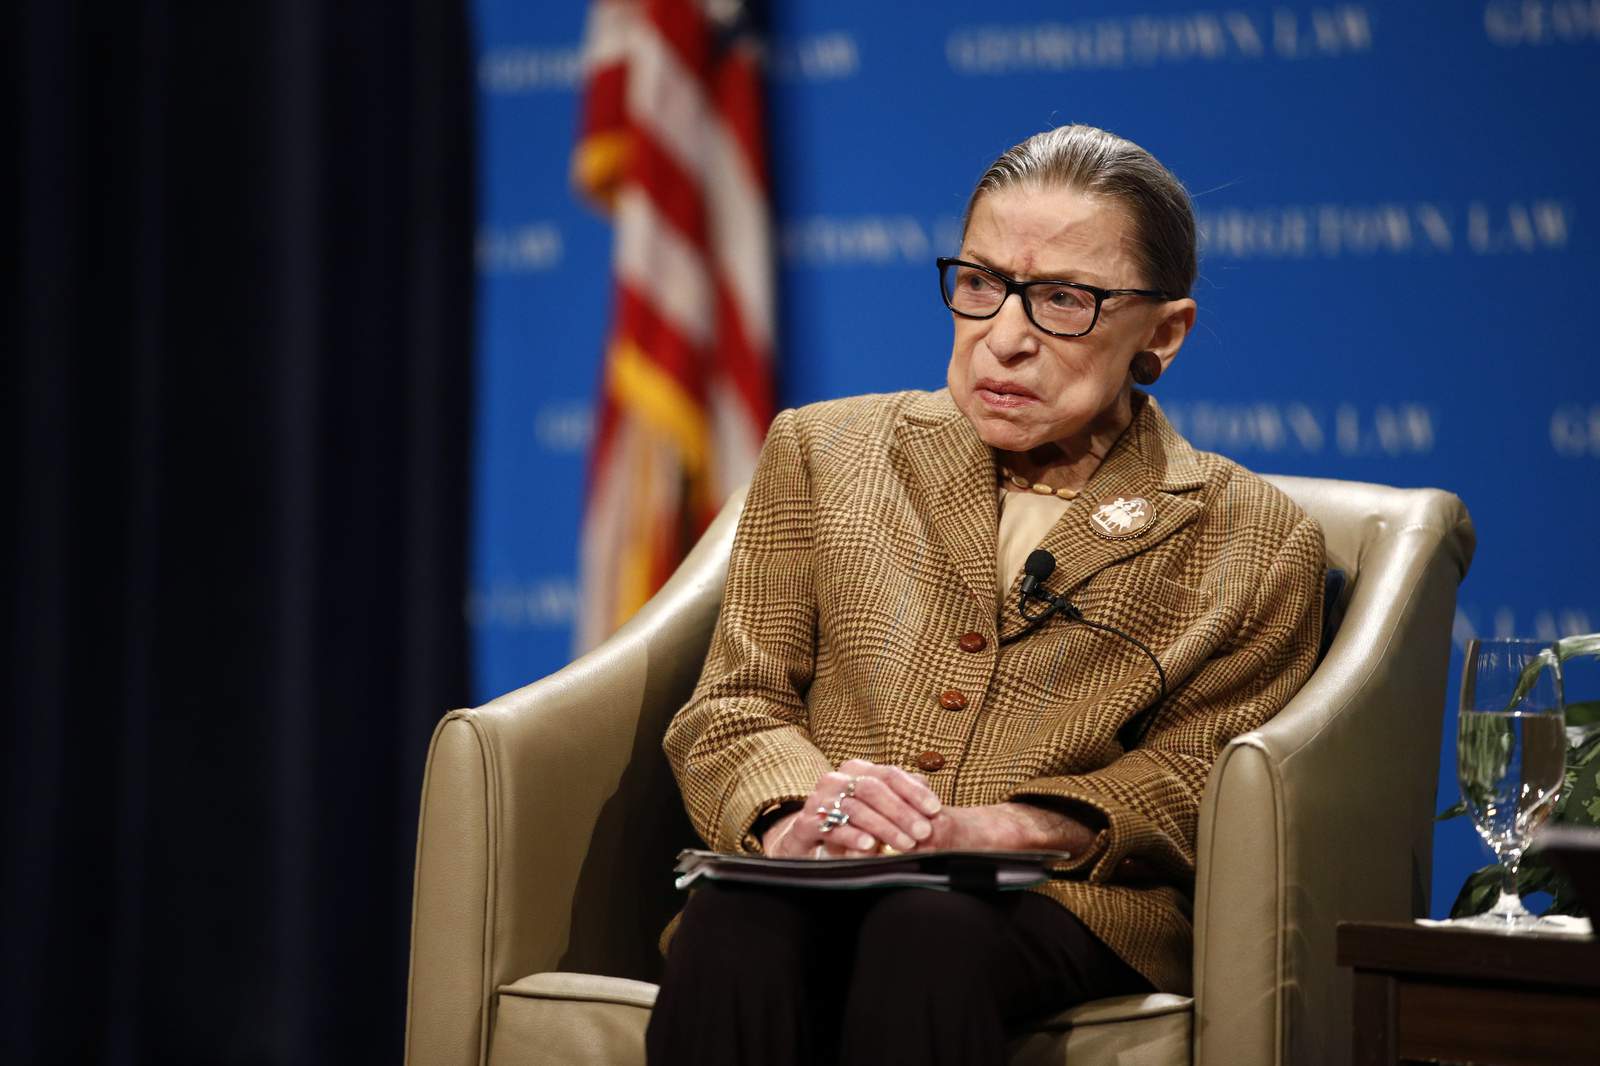 Ginsburg waited 4 months to say her cancer had returned